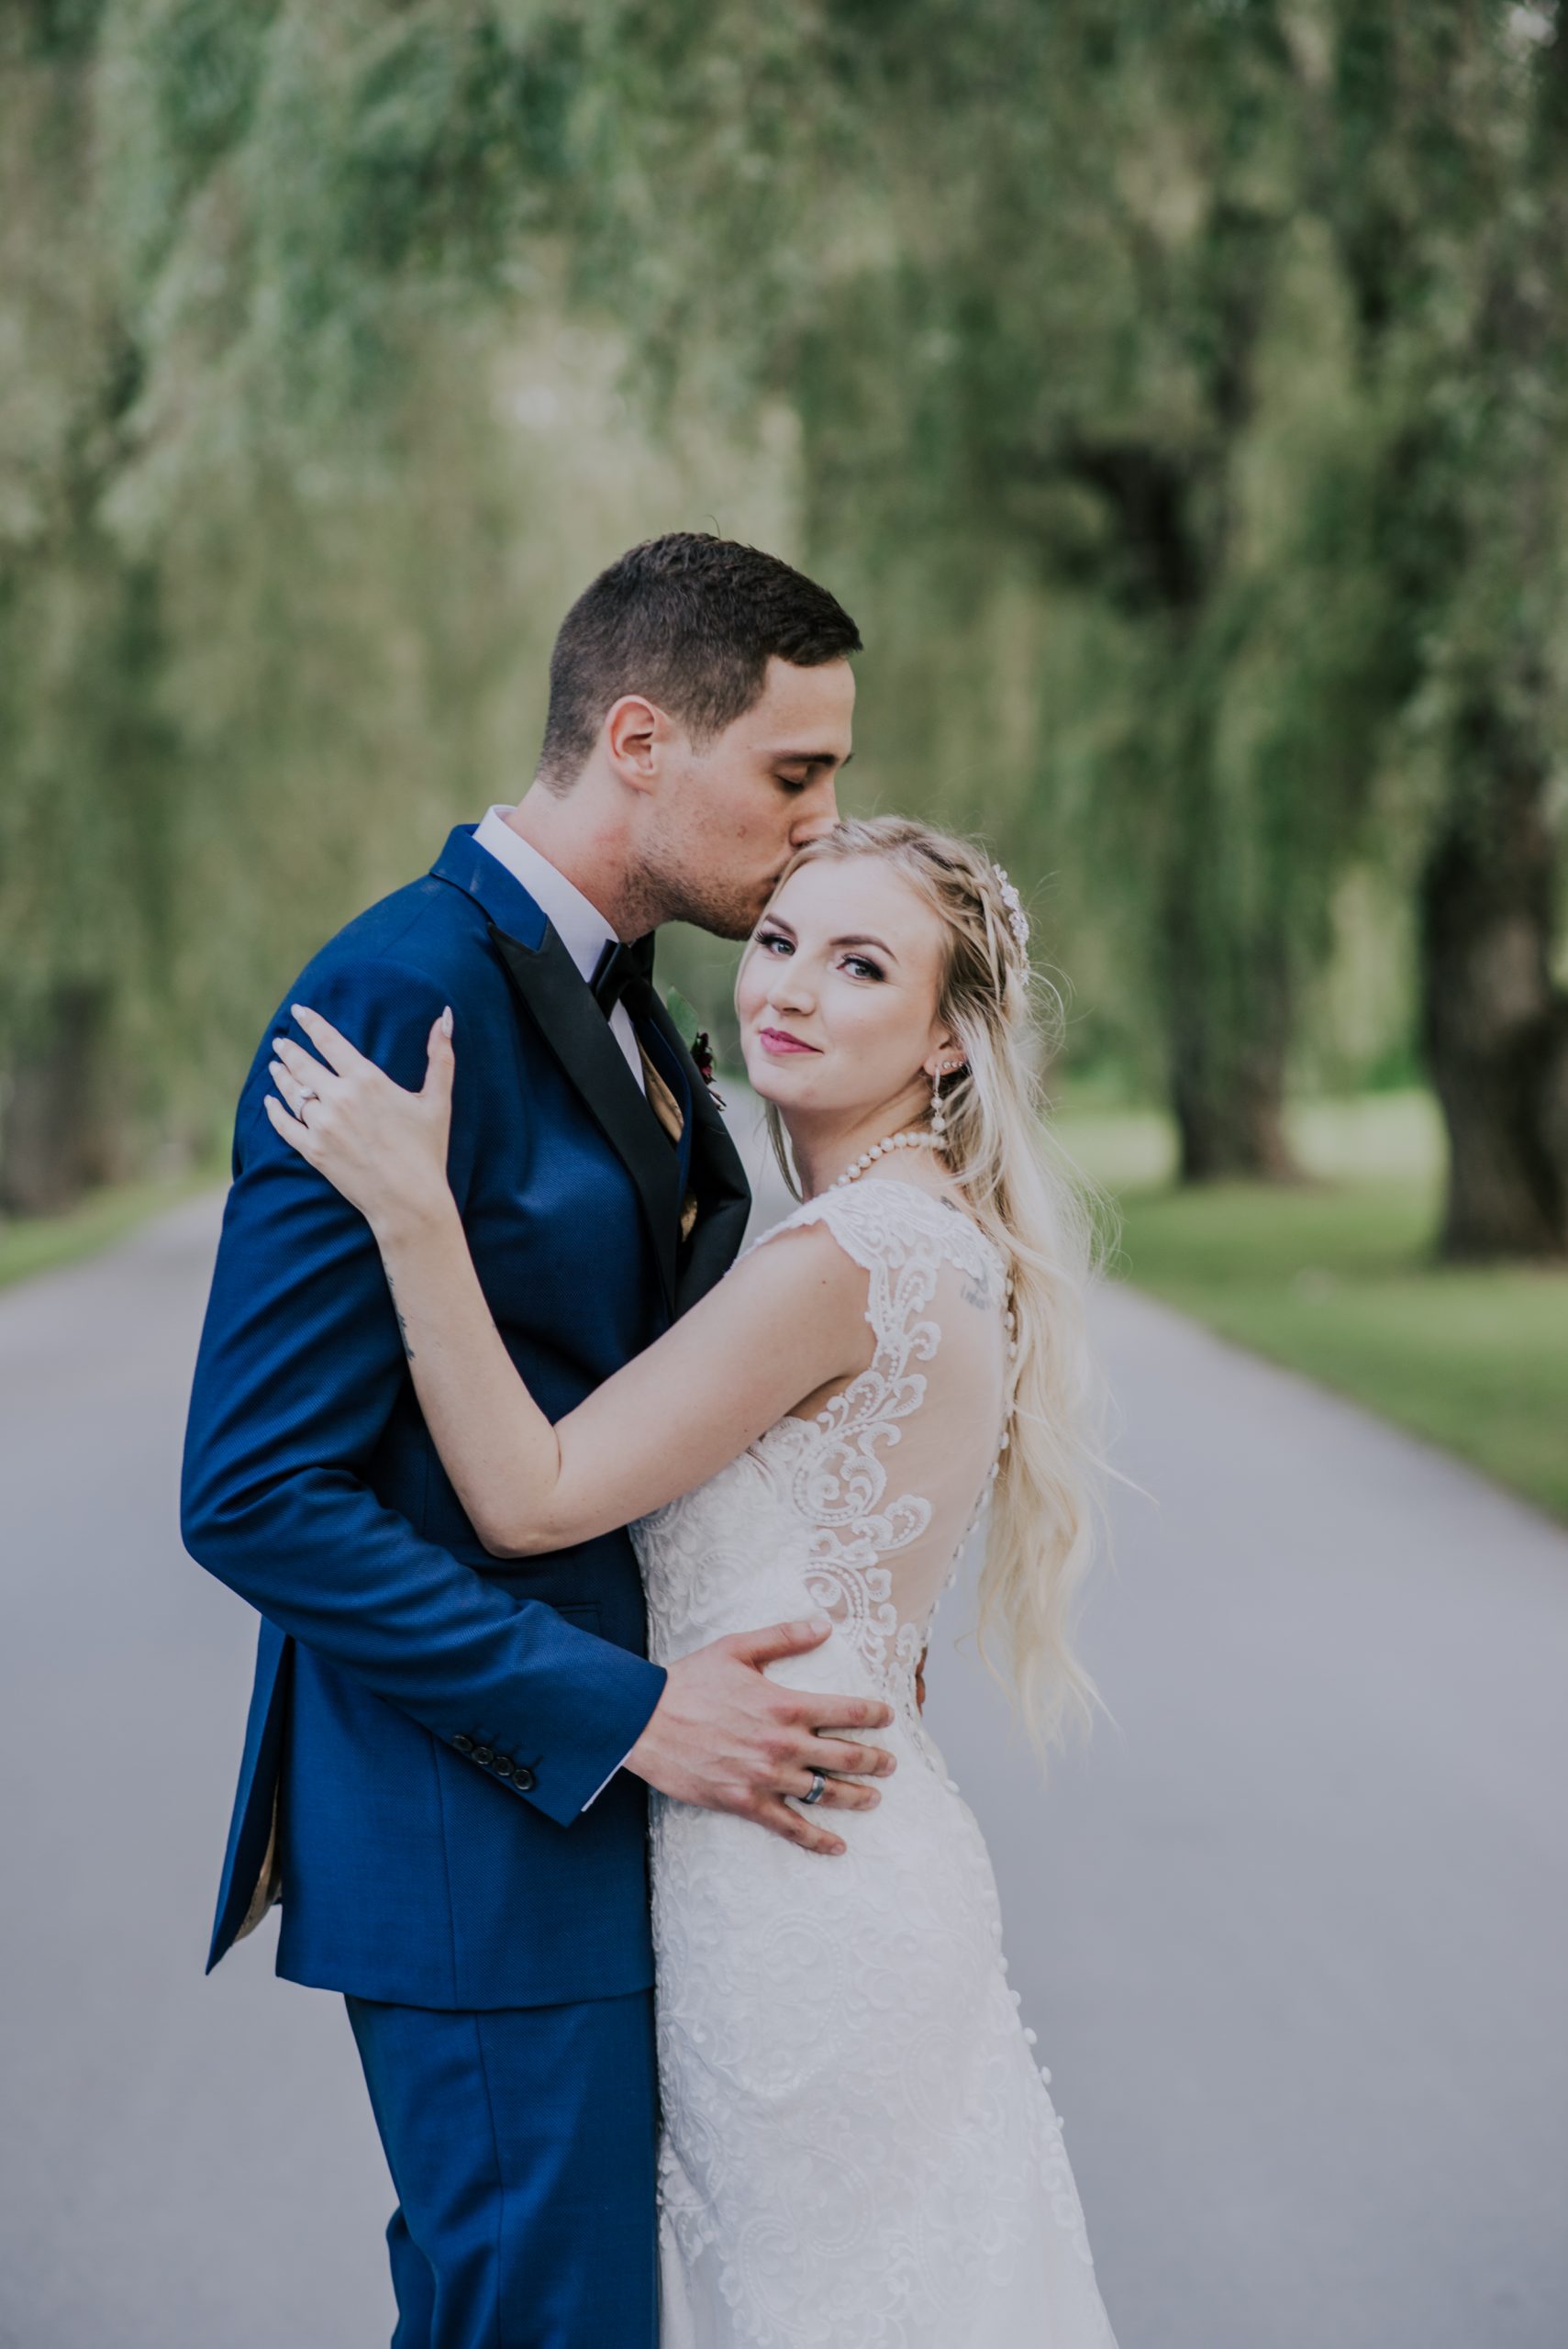 how to schedule your wedding photo timeline